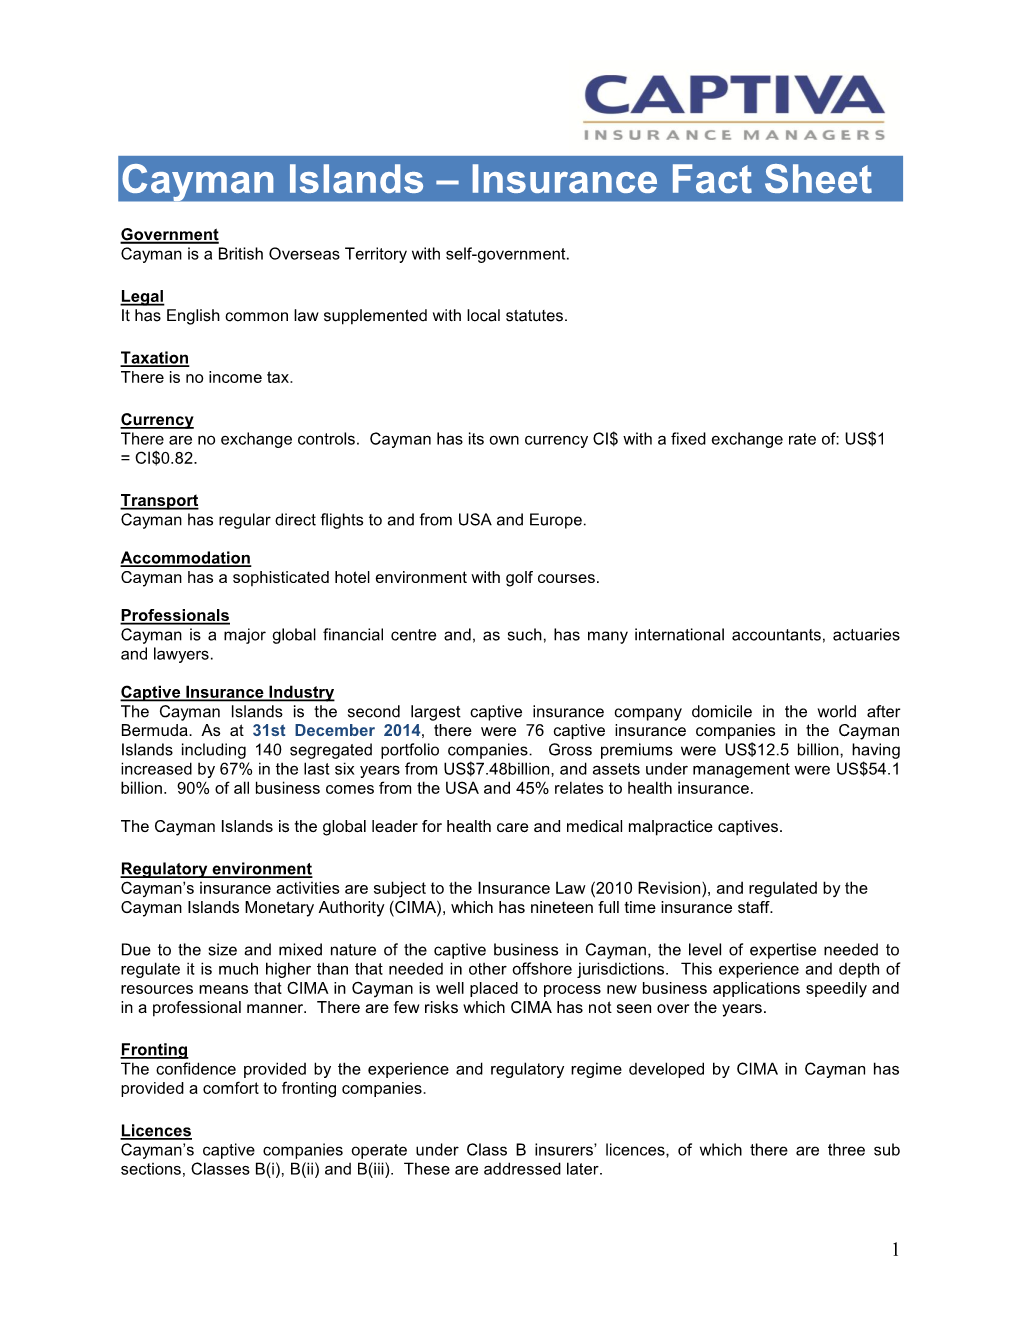 Comparison Between Cayman And